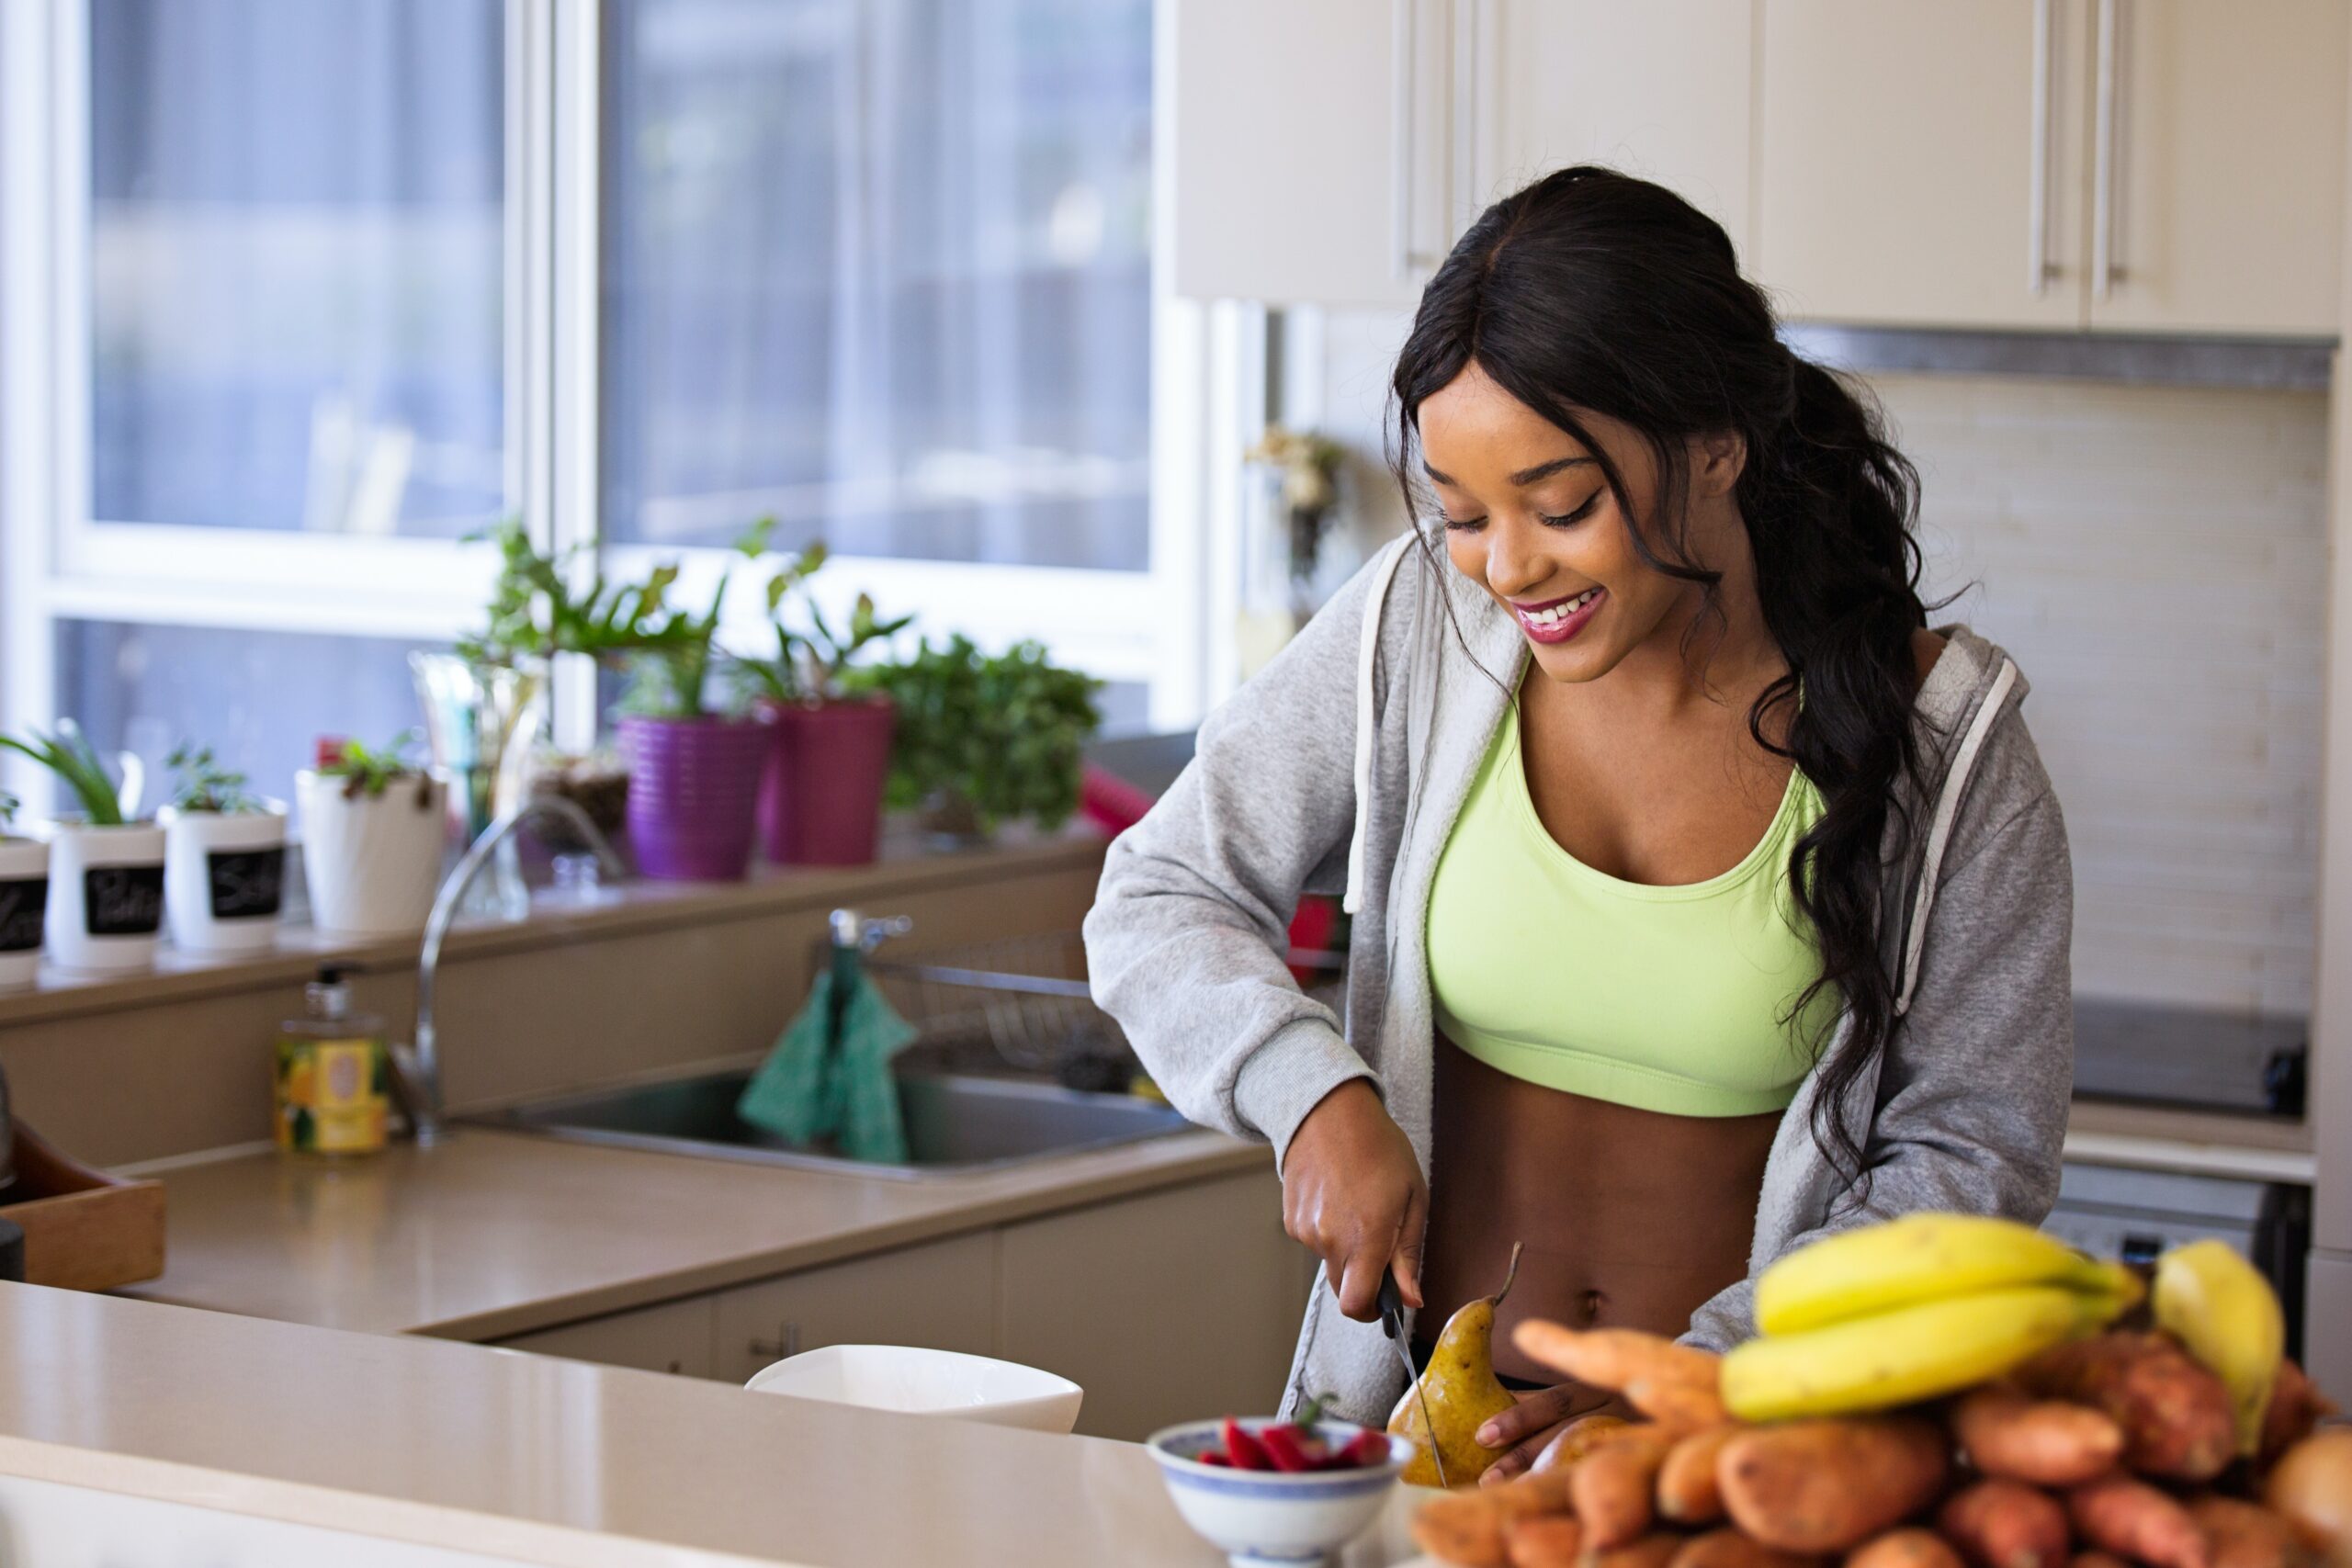 woman wearing athletic clothing chopping a pear in her kitchen next to a bowl of fruit